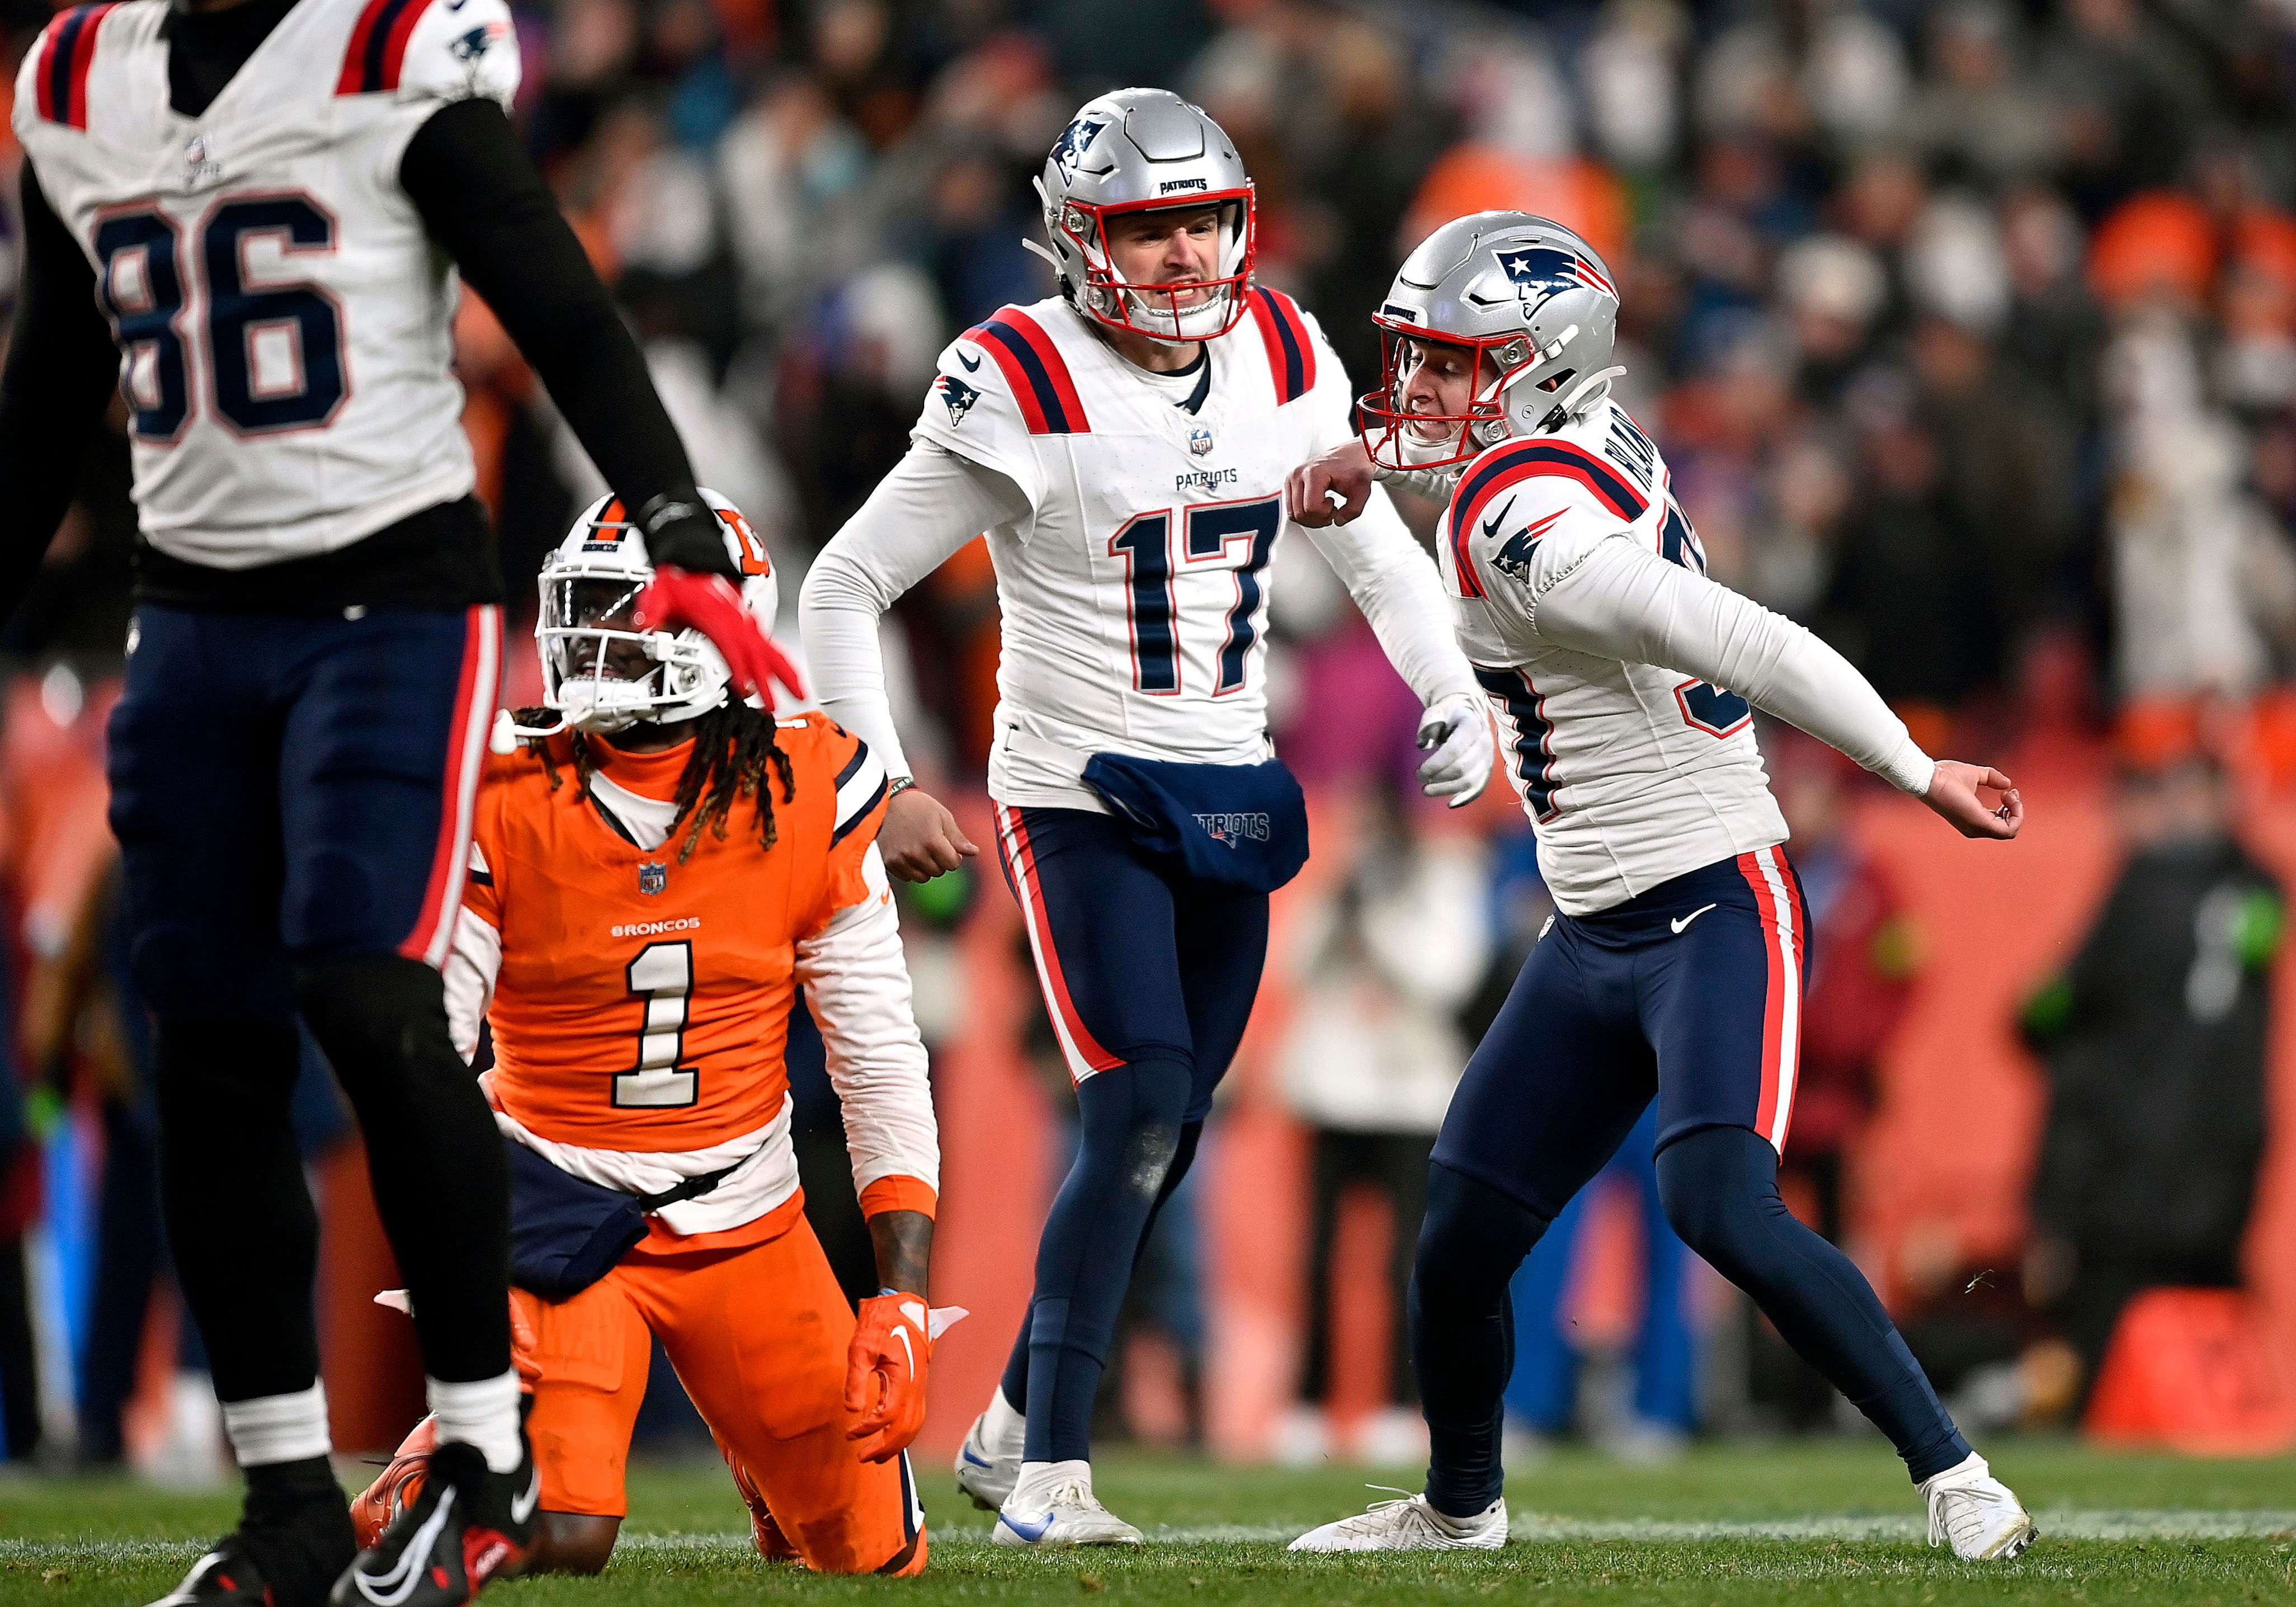 Kicker Chad Ryland (right) kicked a 56-yard field goal to lift the Patriots to a victory in Denver on Sunday.